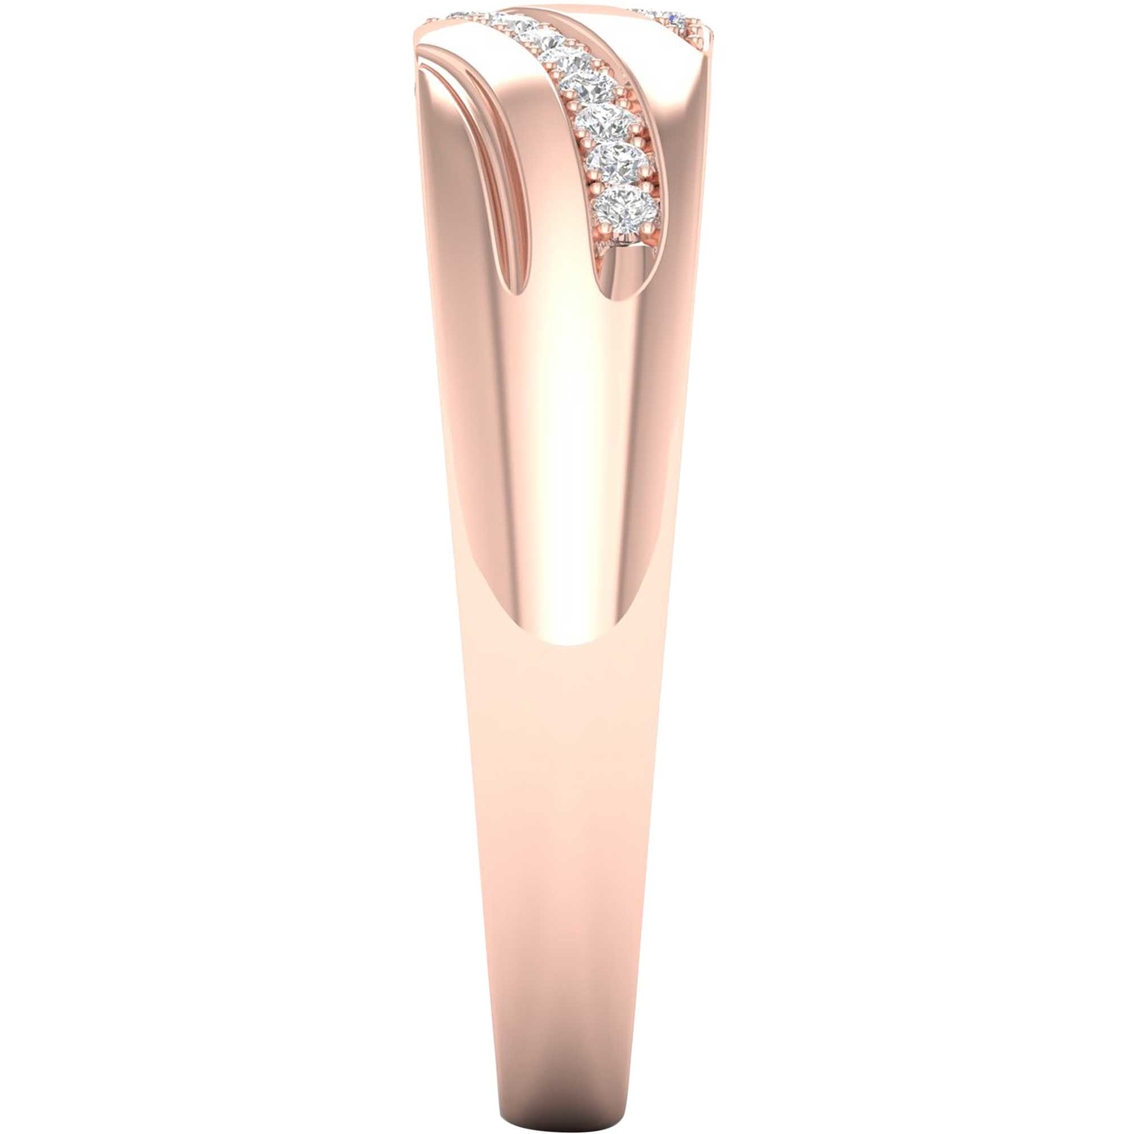 Sterling Silver with 14K Pink Plating Diamond Accent Ring - Image 2 of 3